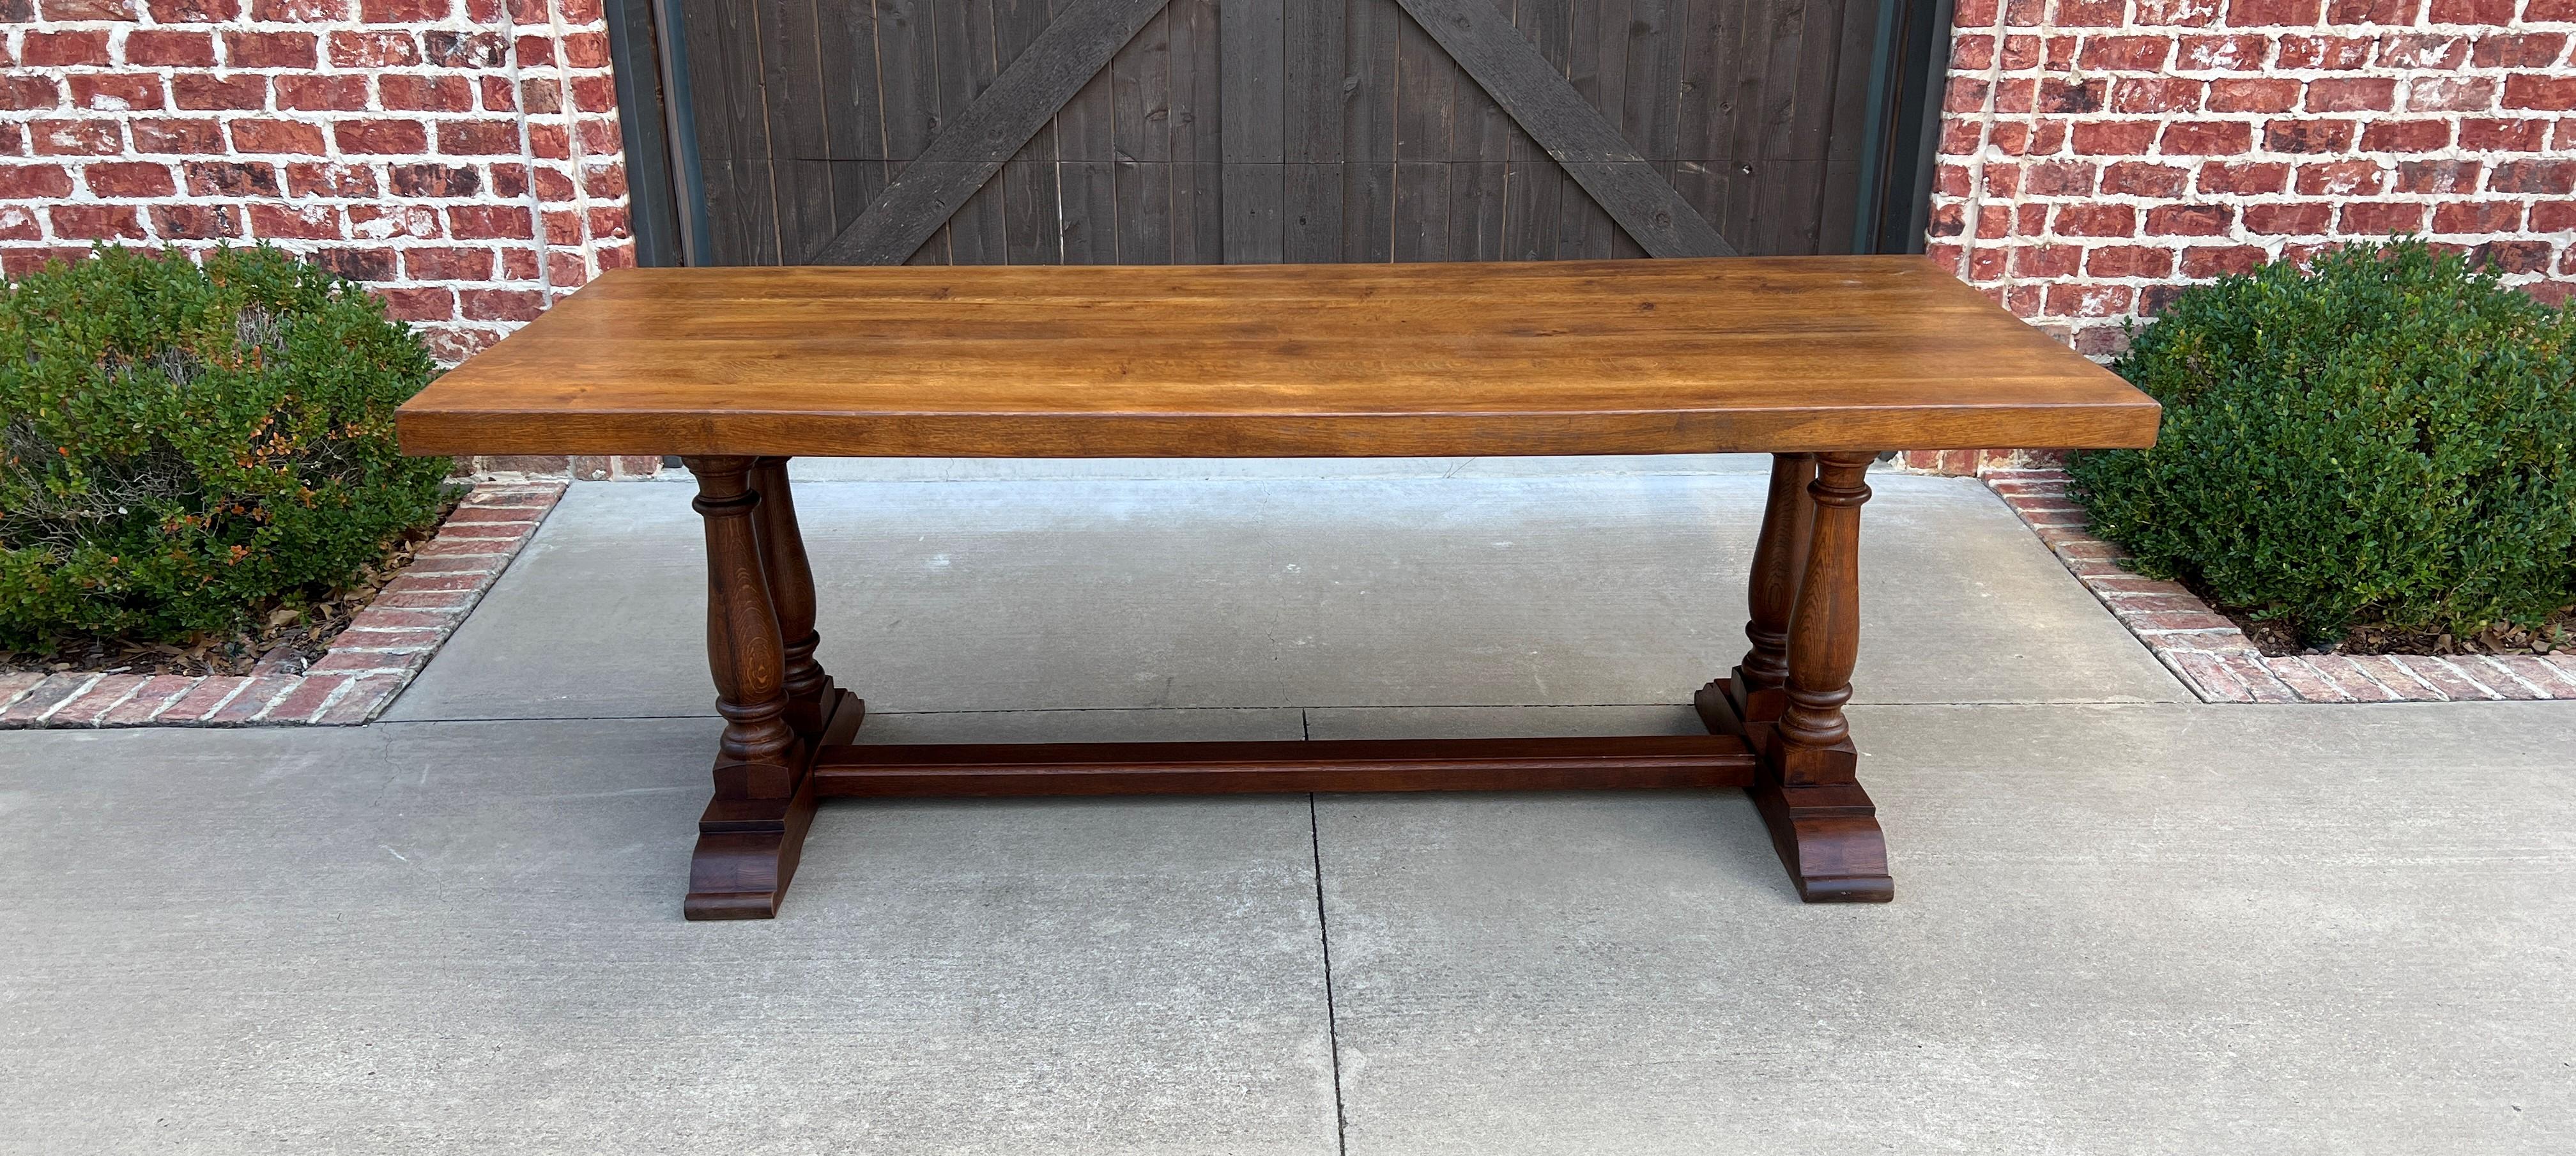 OUTSTANDING Antique English Oak Farm Farmhouse dining table conference Library Table or Desk ~~c. 1920s-1930s

This table has 